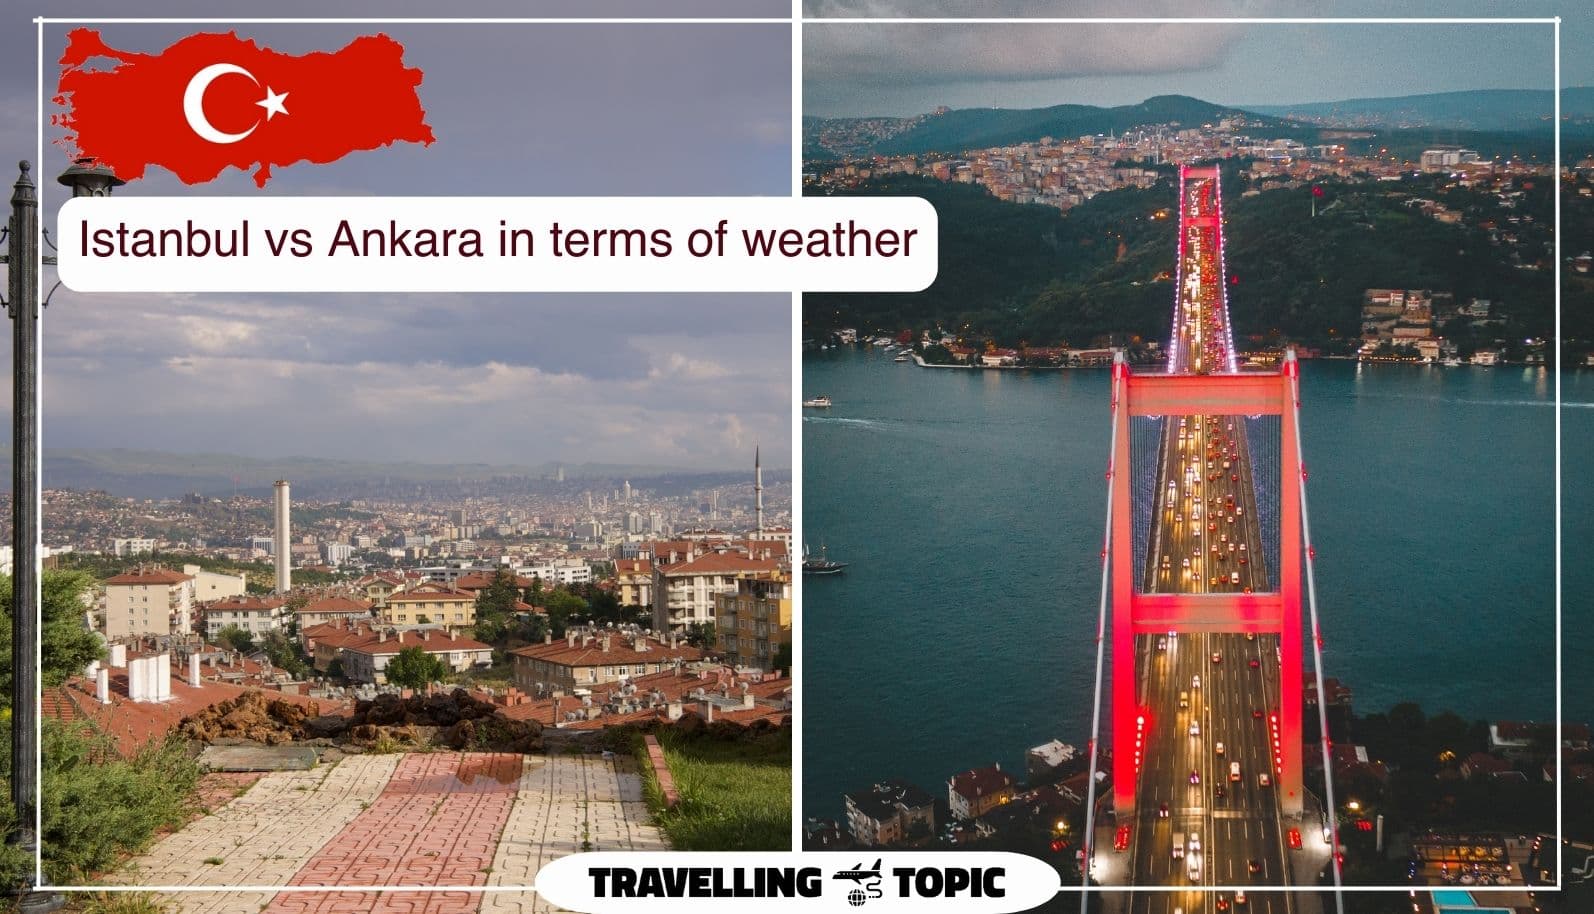 Istanbul vs Ankara in terms of weather